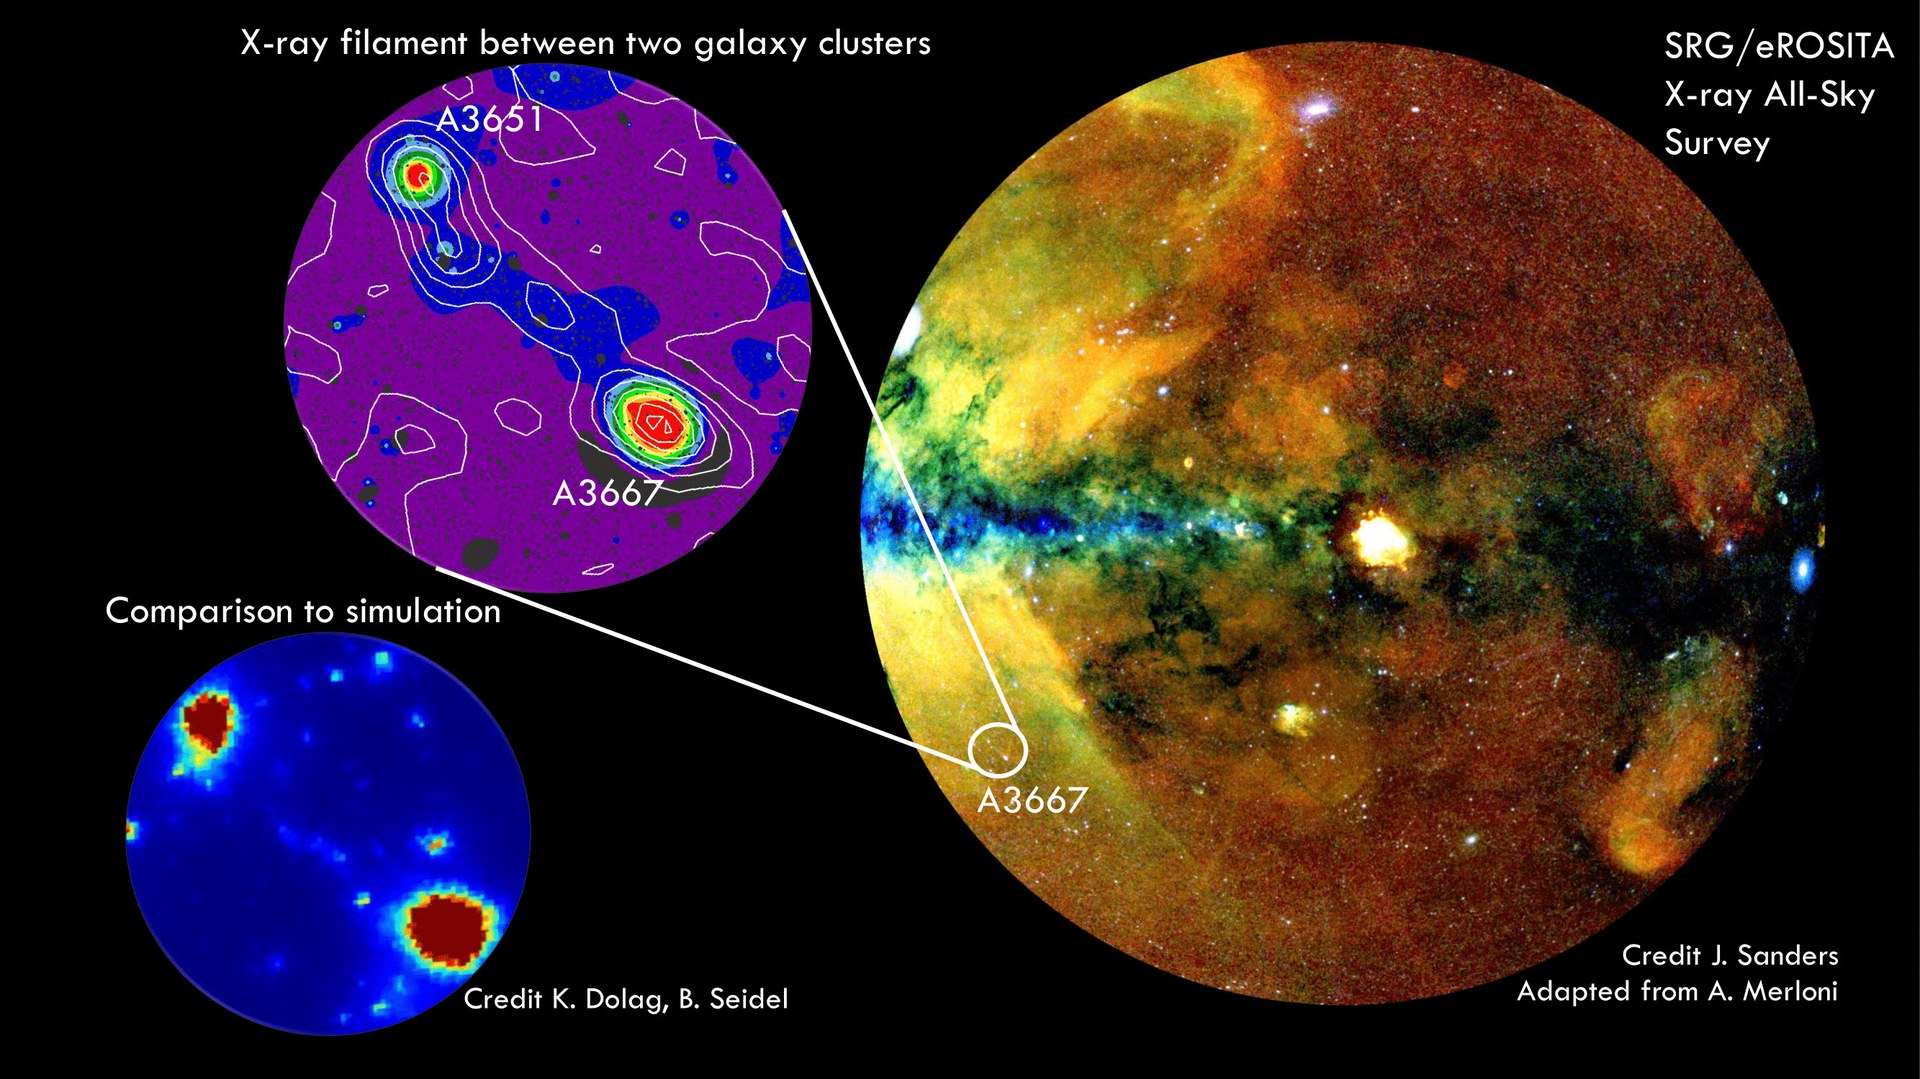 eROSITA X-ray image with the newly discovered filament between two galaxy clusters. - The distribution of galaxies (white contours), as seen from the Two Micron All Sky Survey, follows the structure of the filament. In the SLOW simulation, which is tailored to reproduce the main features of the Local Universe, this individual system with both clusters and the filament spine is reproduced as well.